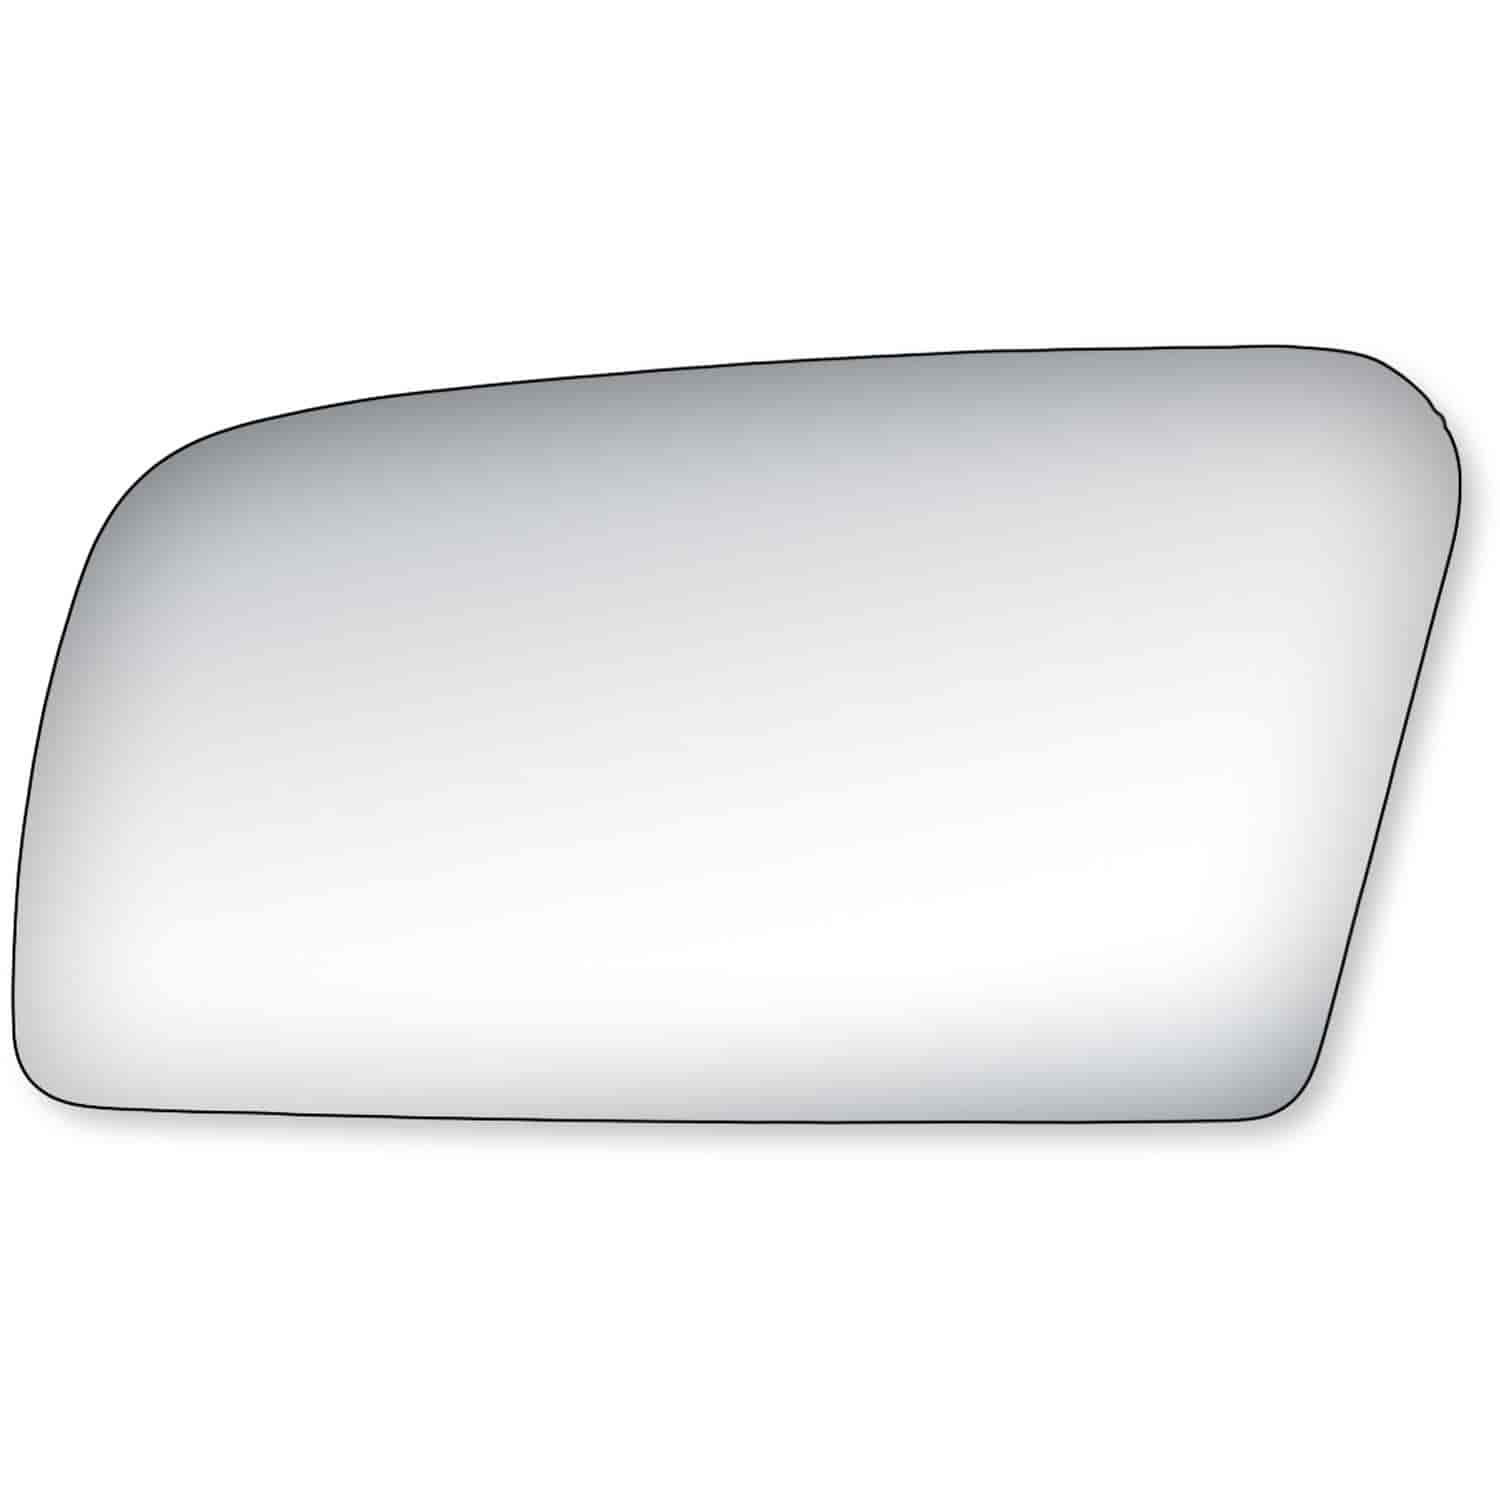 Replacement Glass for 88-92 626 Sedan the glass measures 3 3/8 tall by 6 9/16 wide and 7 diagonally